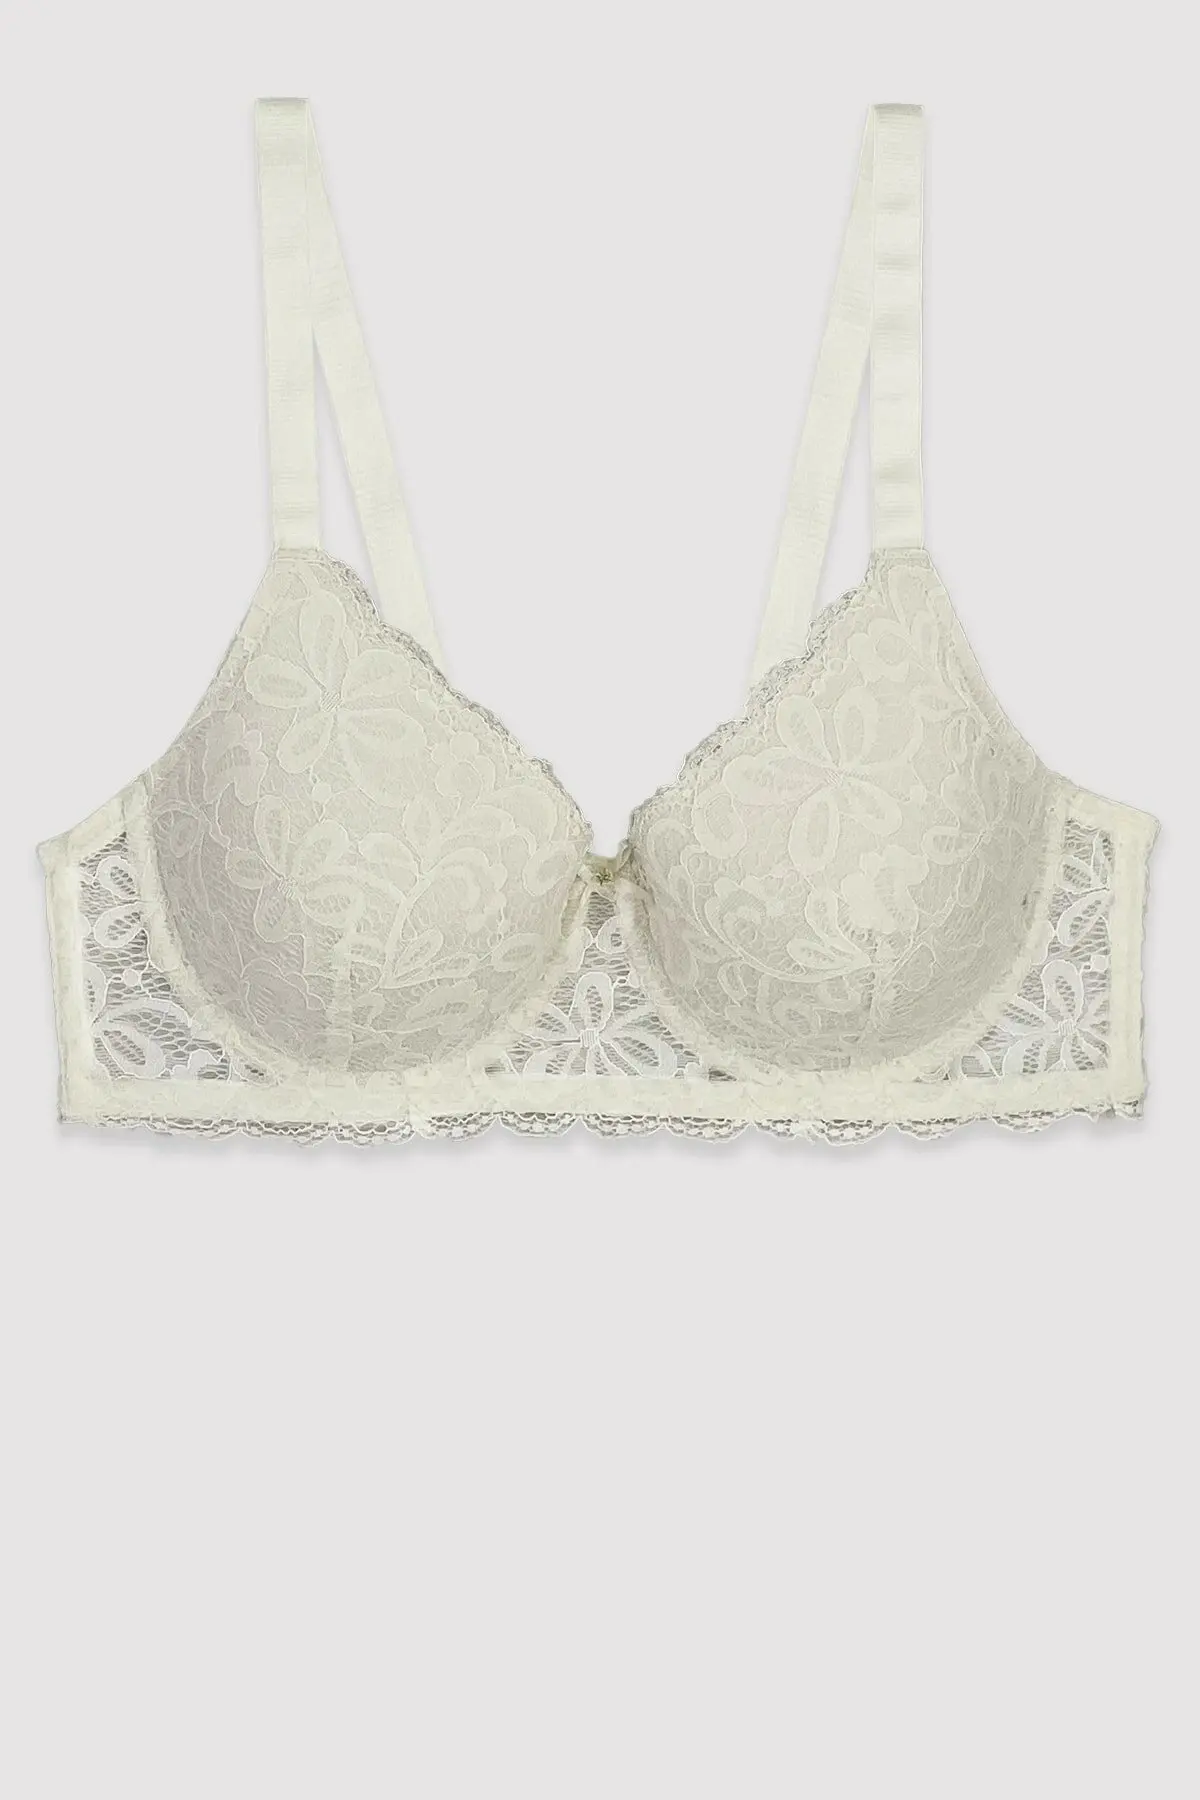 LOOK FOR YOUR WONDERFUL NIGHTS WITH ITS STUNNING WOMEN 6209 Barcelona Empty Cup Single Bra FREE  SHIPPING